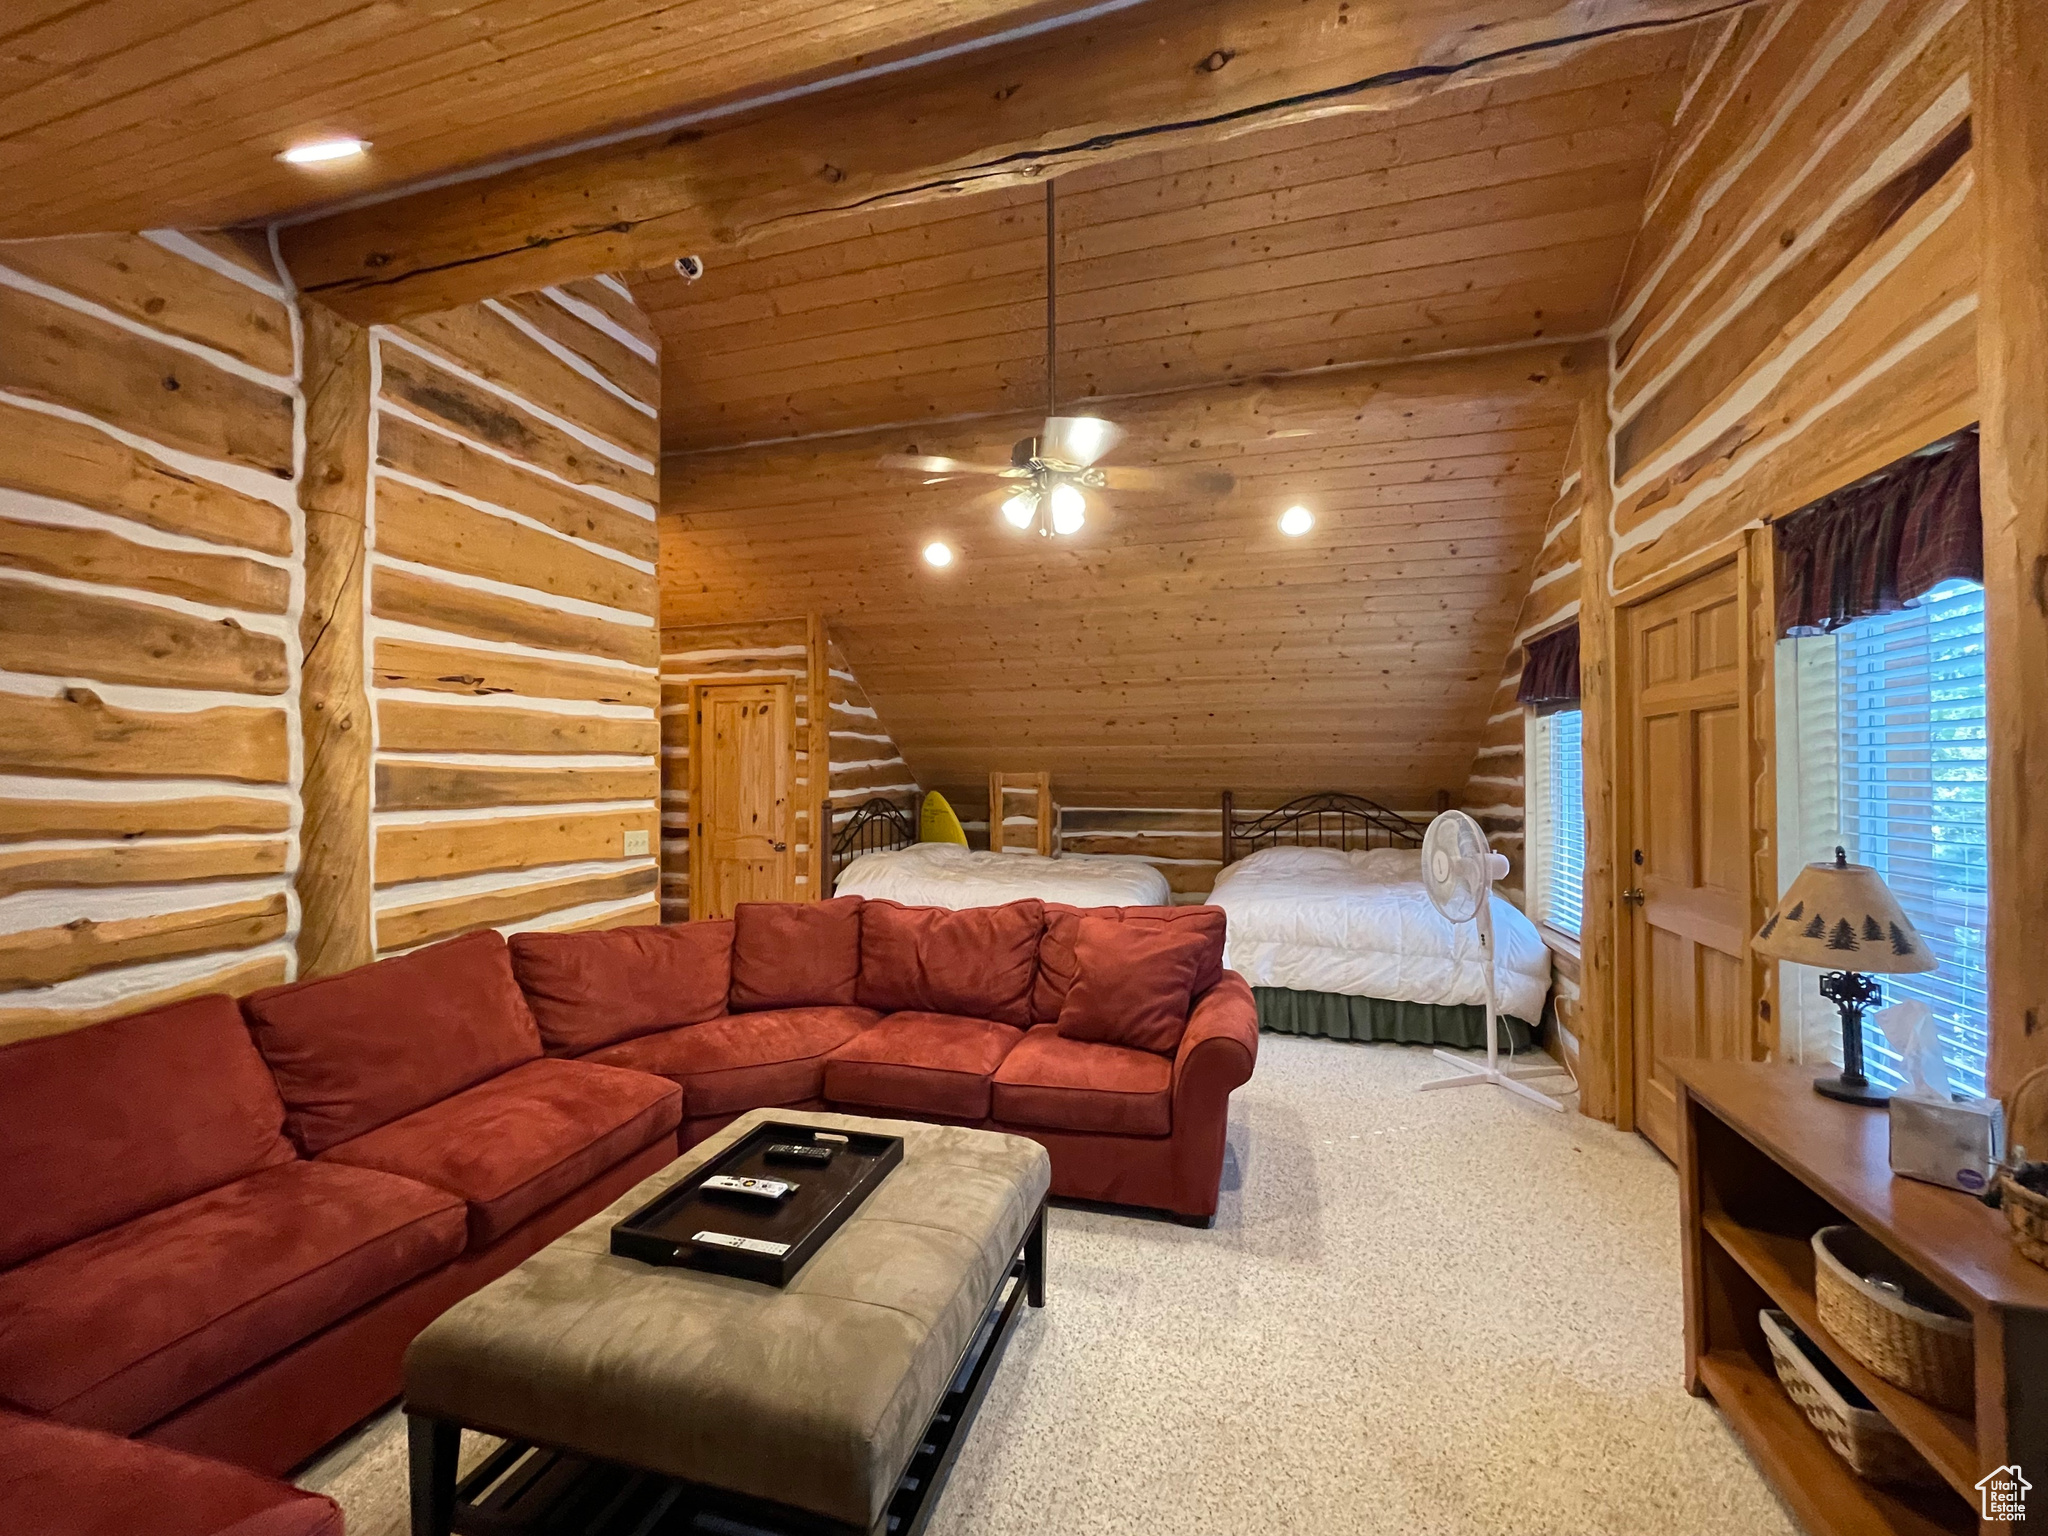 Bedroom/media room with wood ceiling, carpet flooring, high vaulted ceiling, and rustic walls